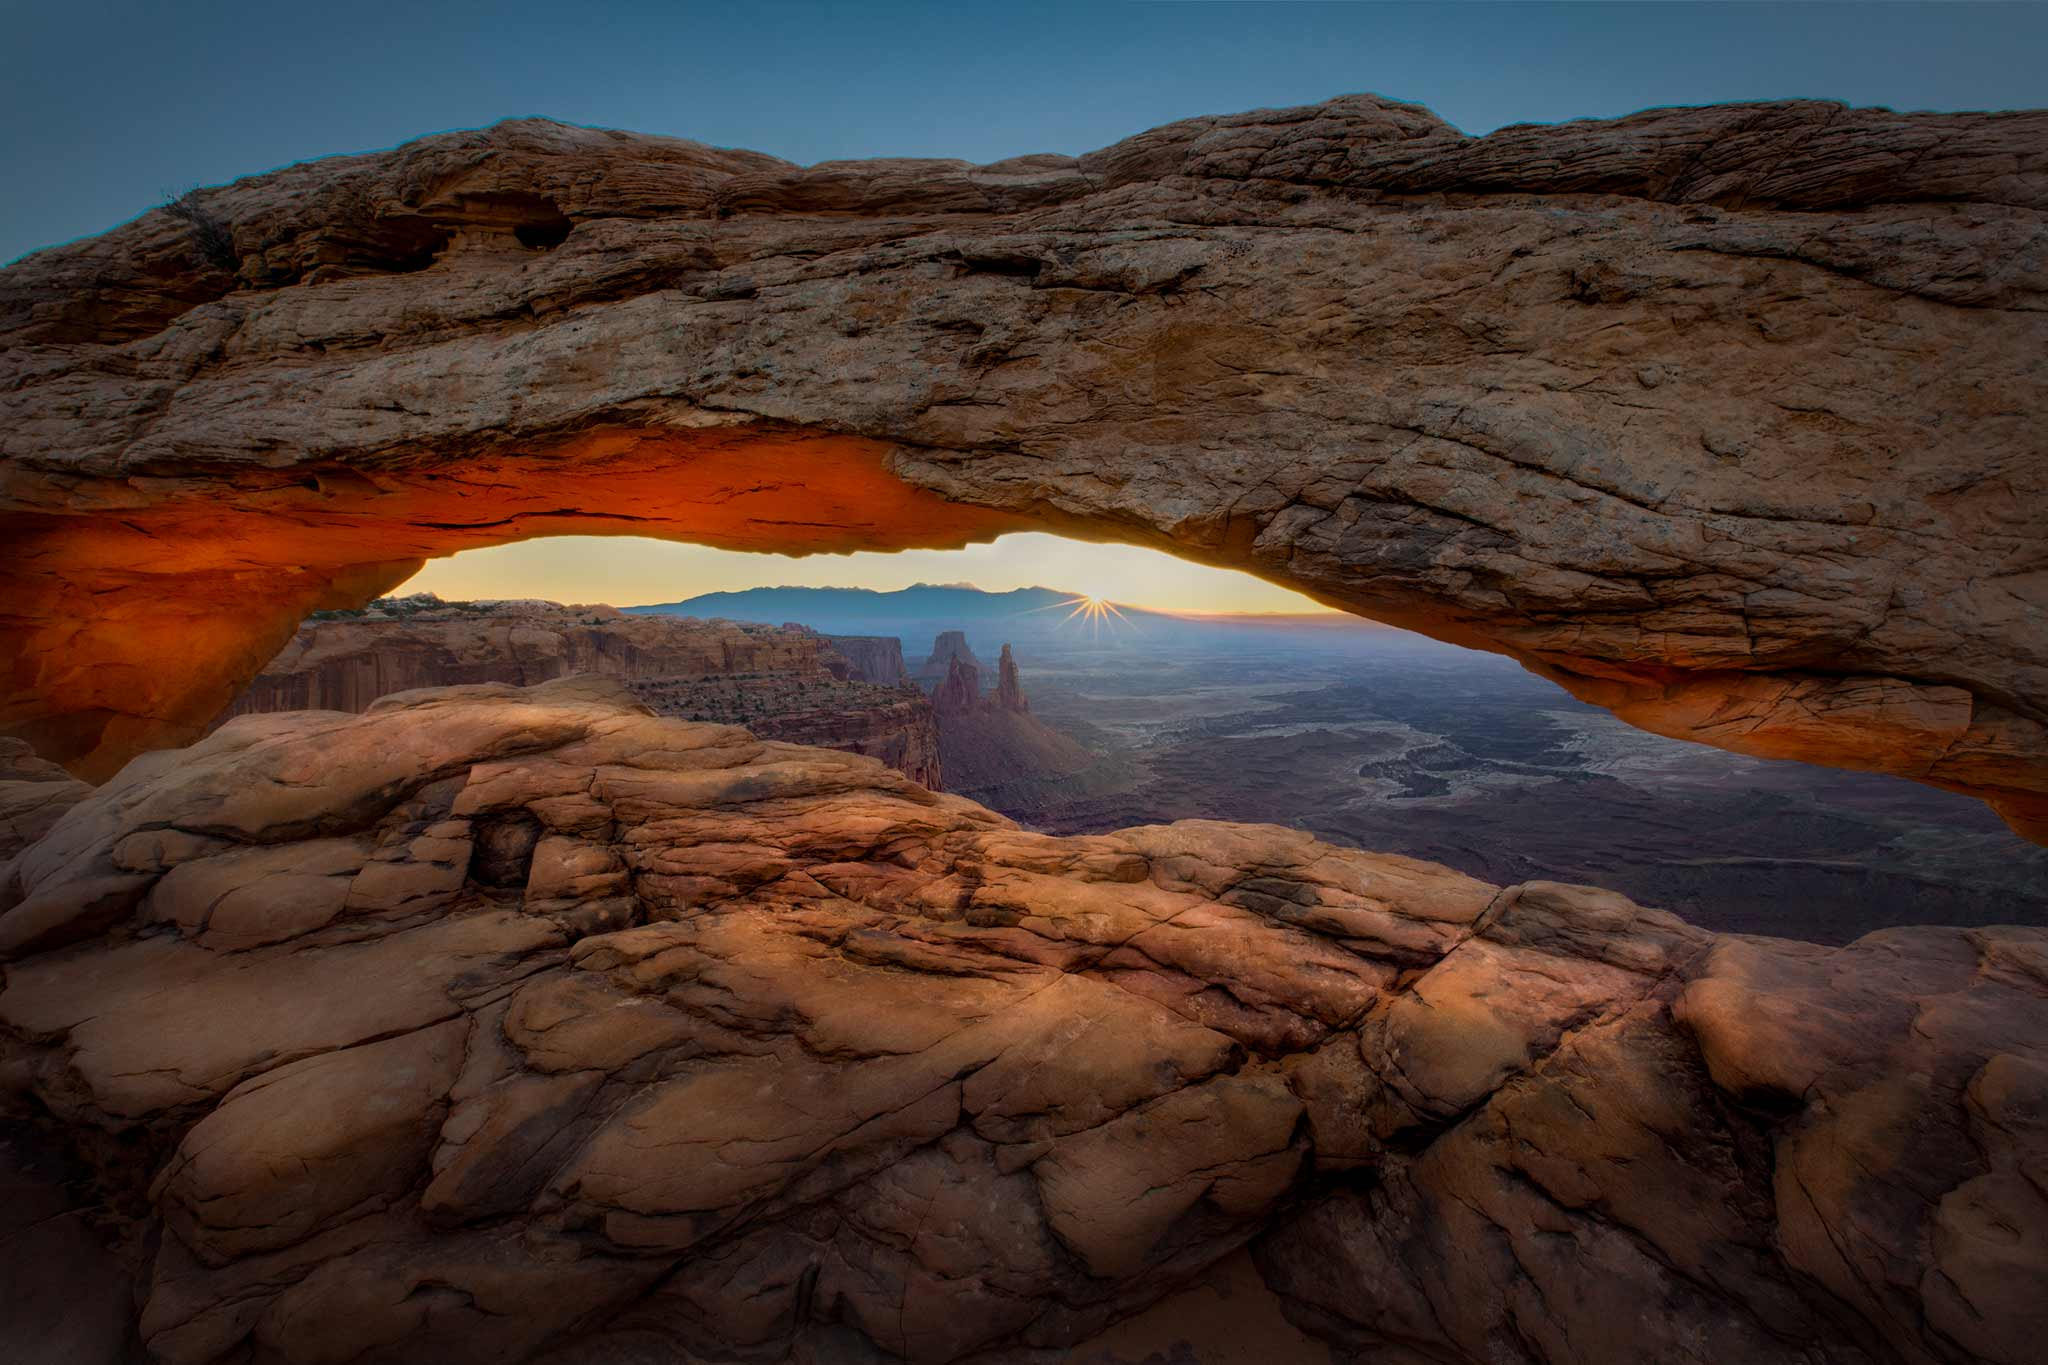 Mesa Arch - an iconic location